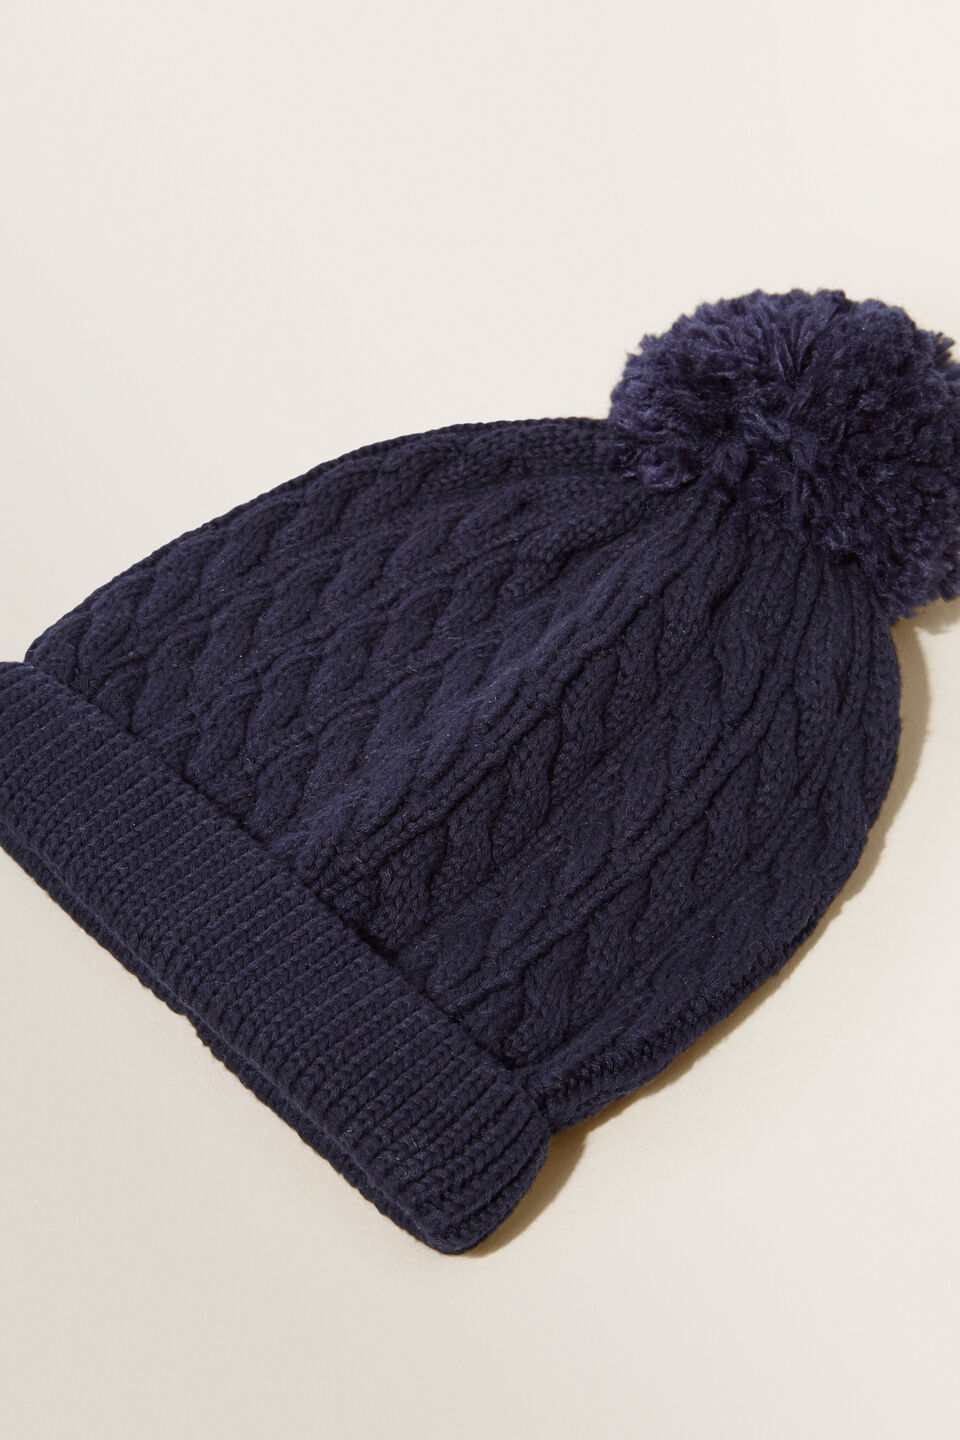 Midnight Blue Cable Knit Beanie  Midnight Blue